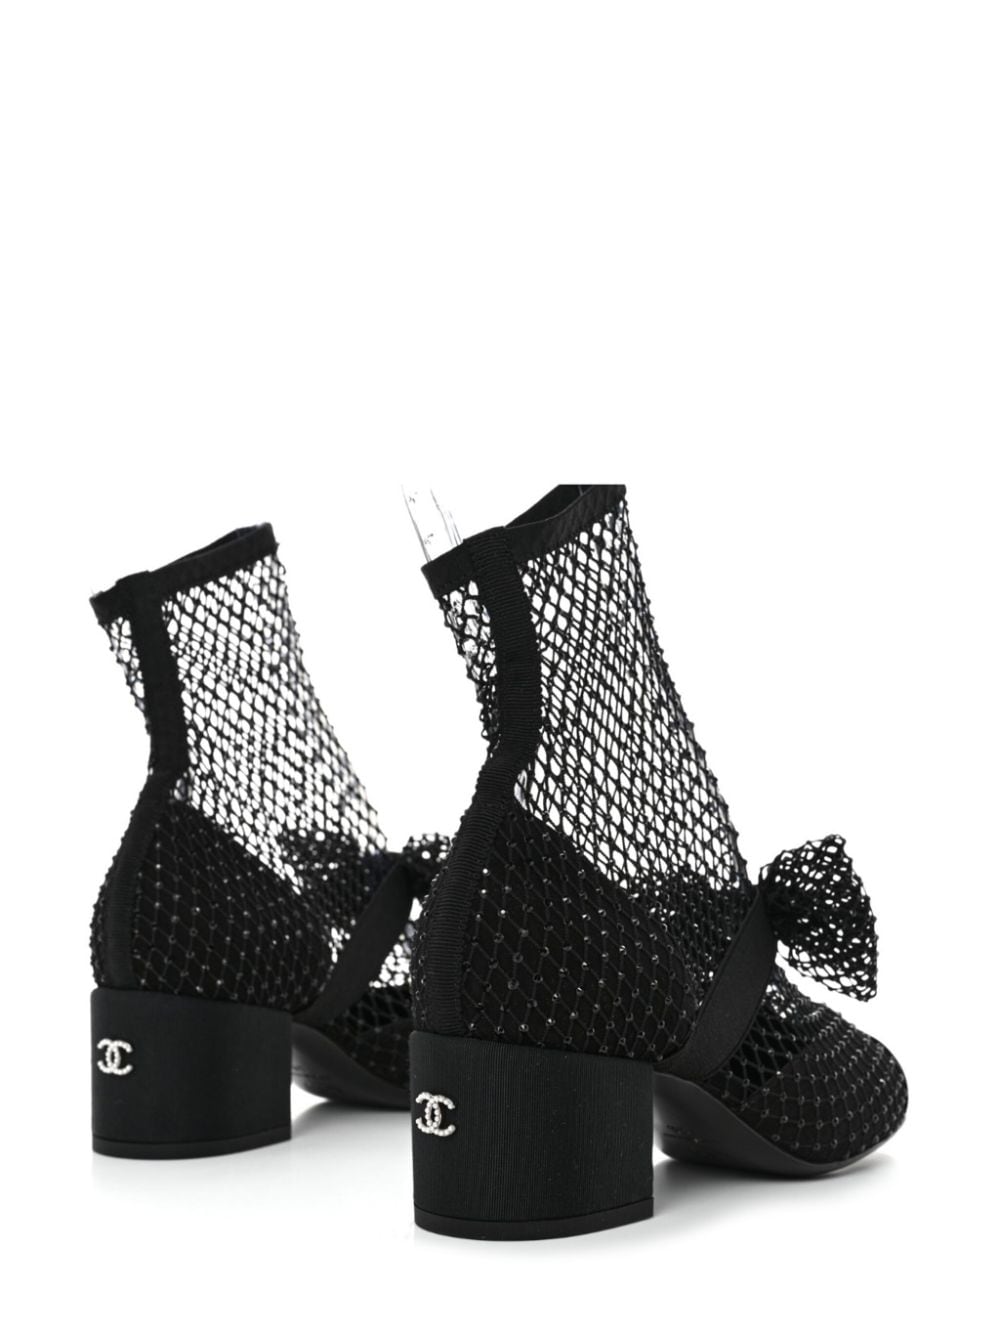 CHANEL Pre-Owned crystal-embellished Fishnet Mary Jane Pumps - Farfetch